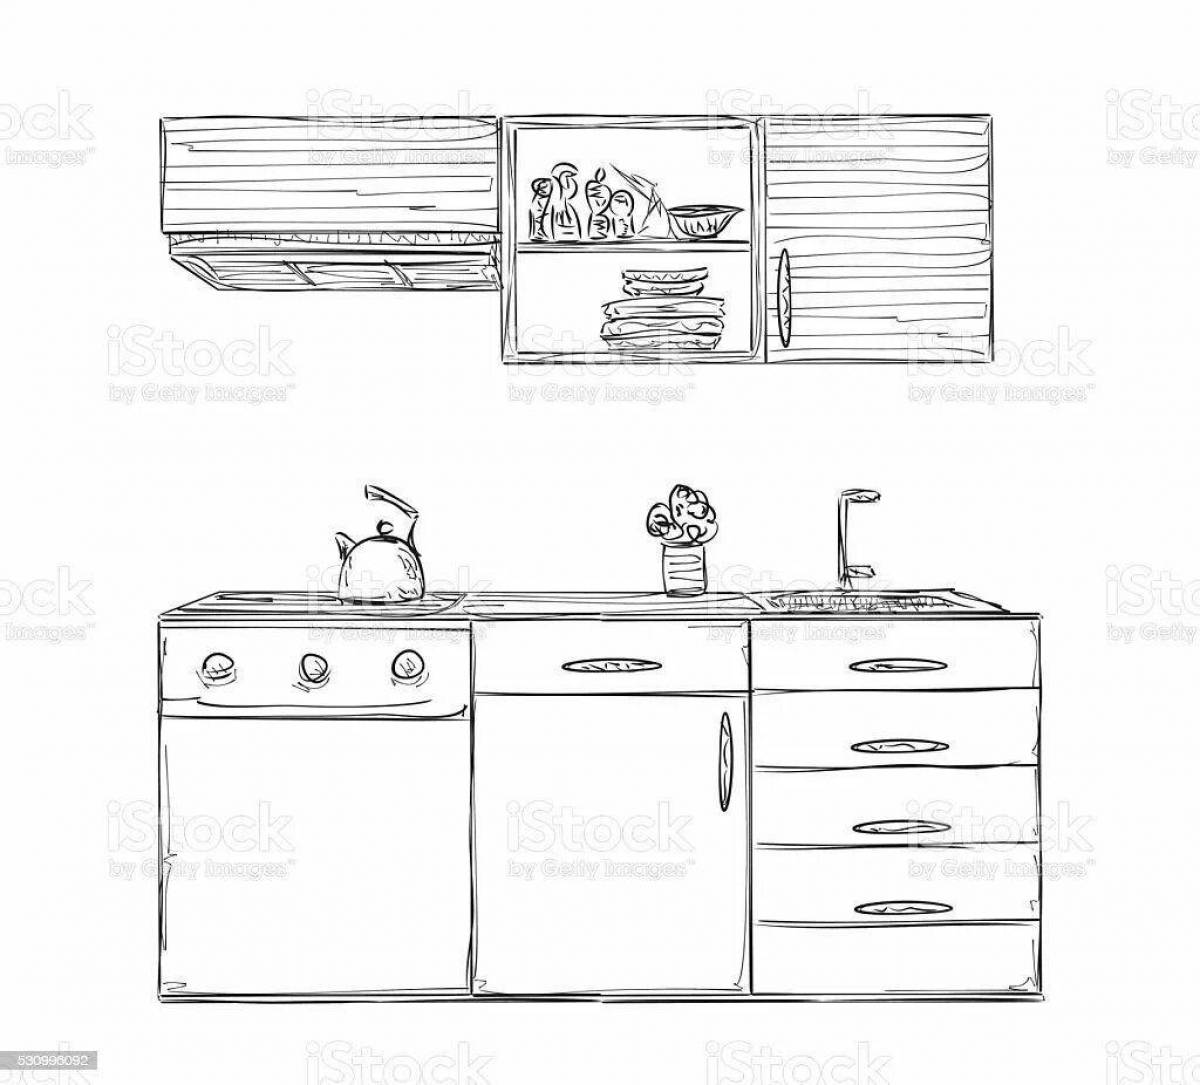 Fun coloring of the kitchen cabinet